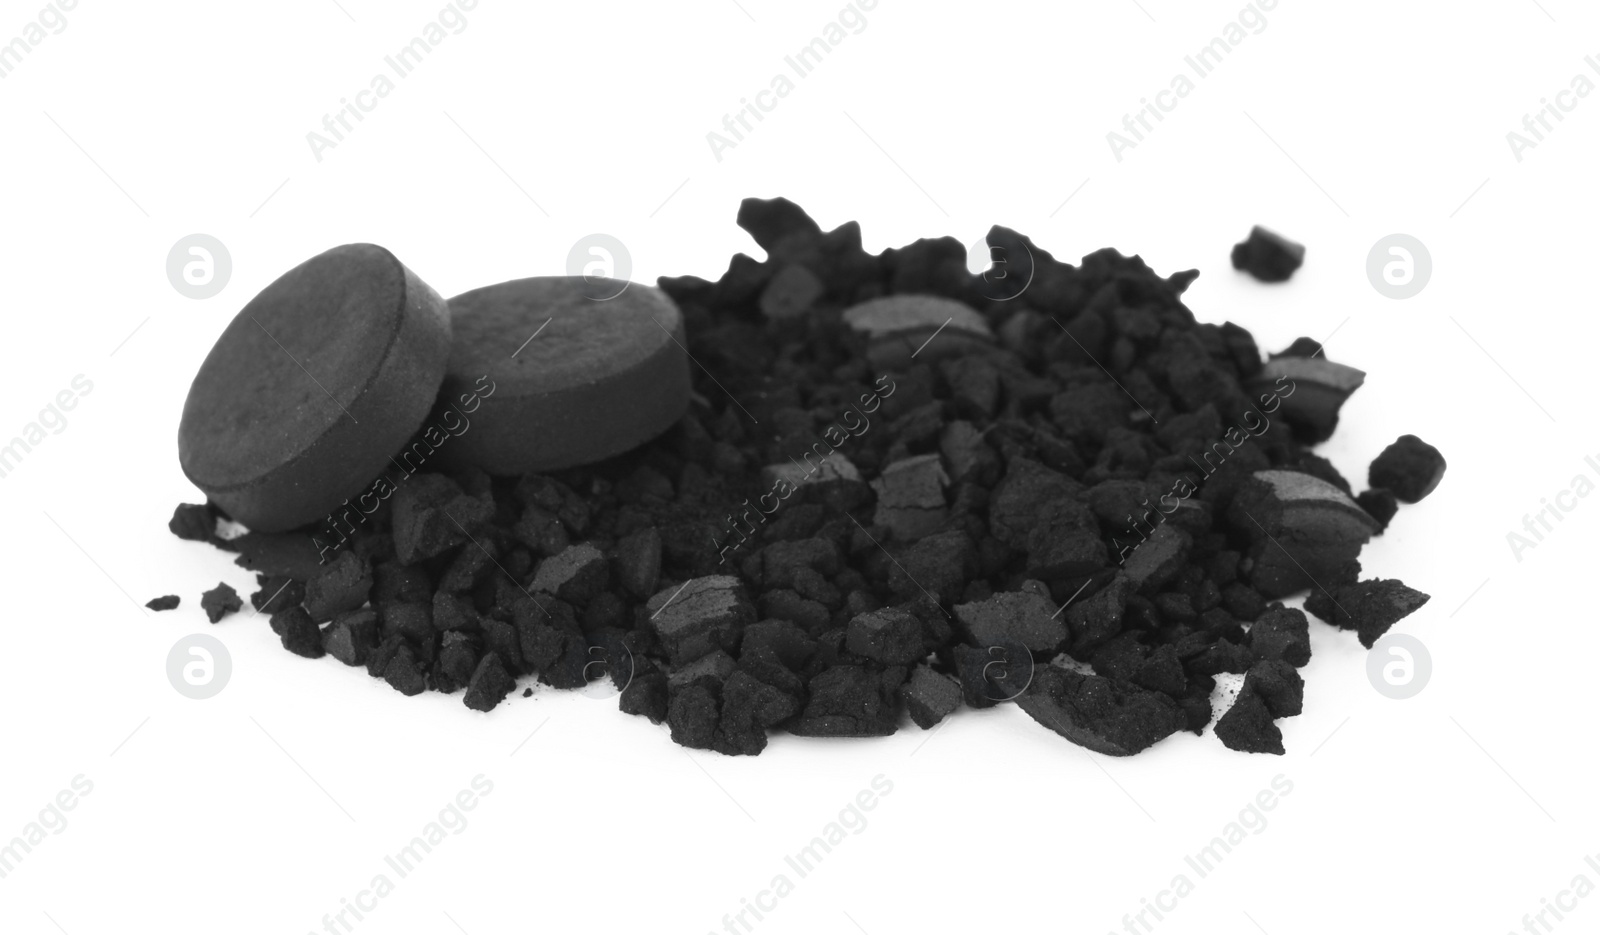 Photo of Activated charcoal on white background. Potent sorbent